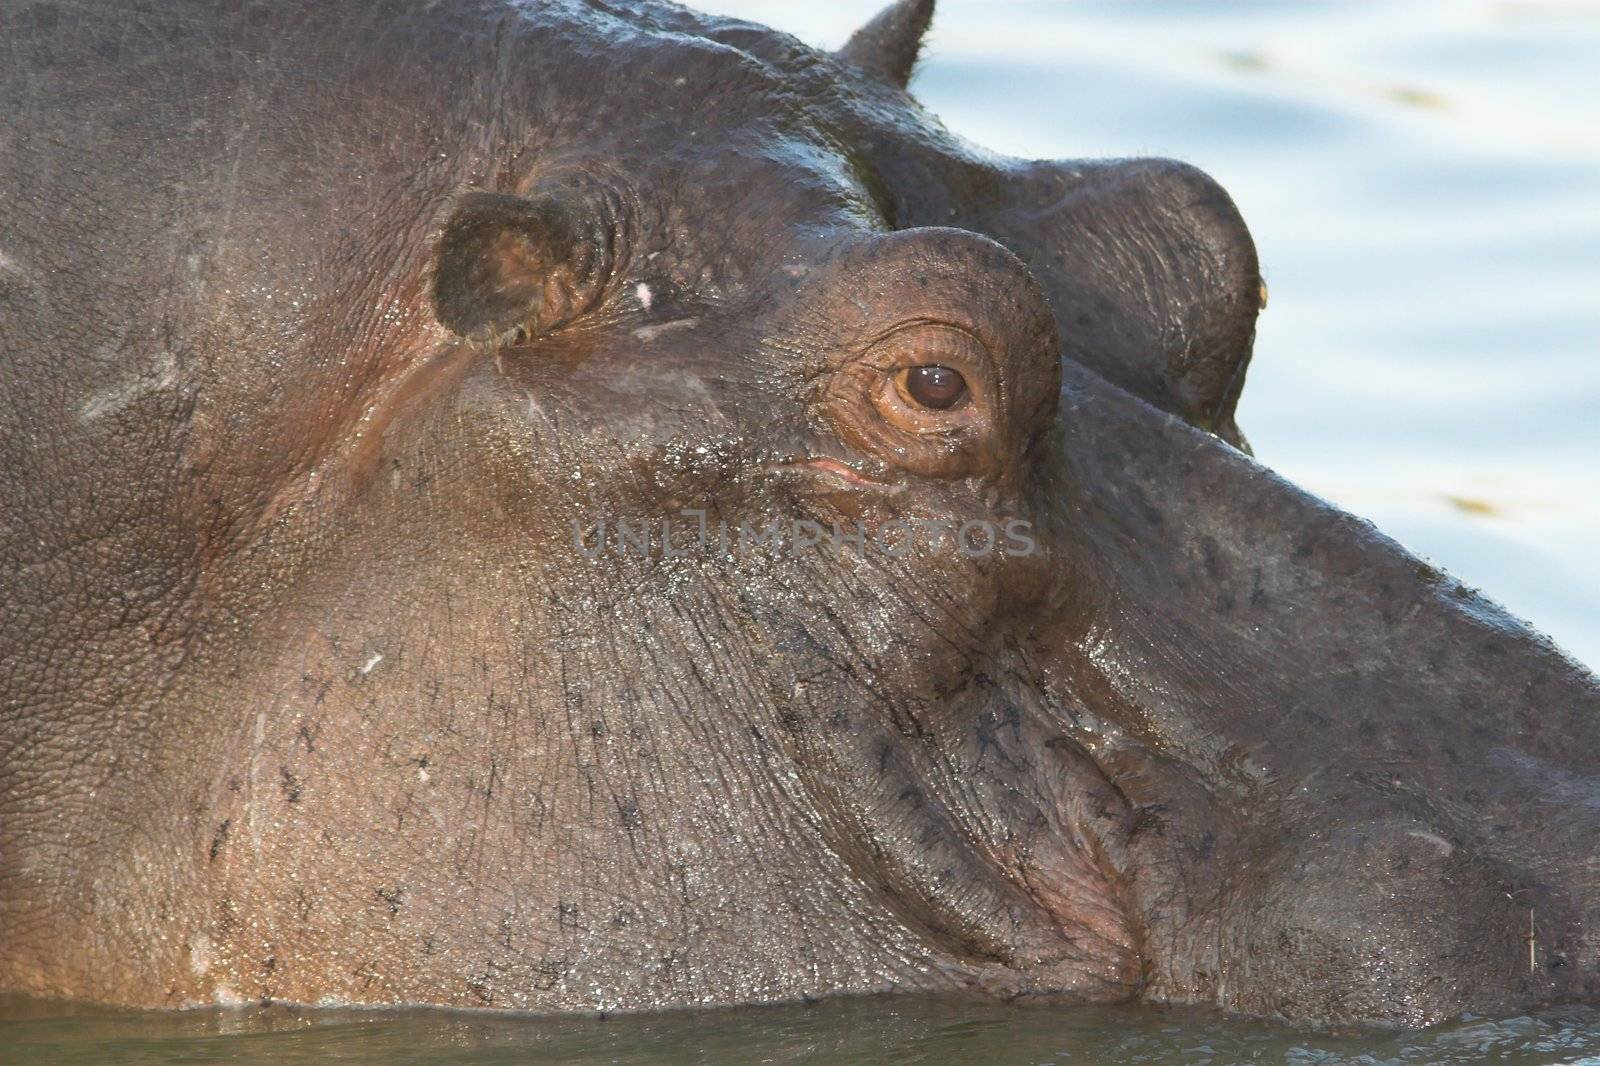 Close up shot of a hippo's head